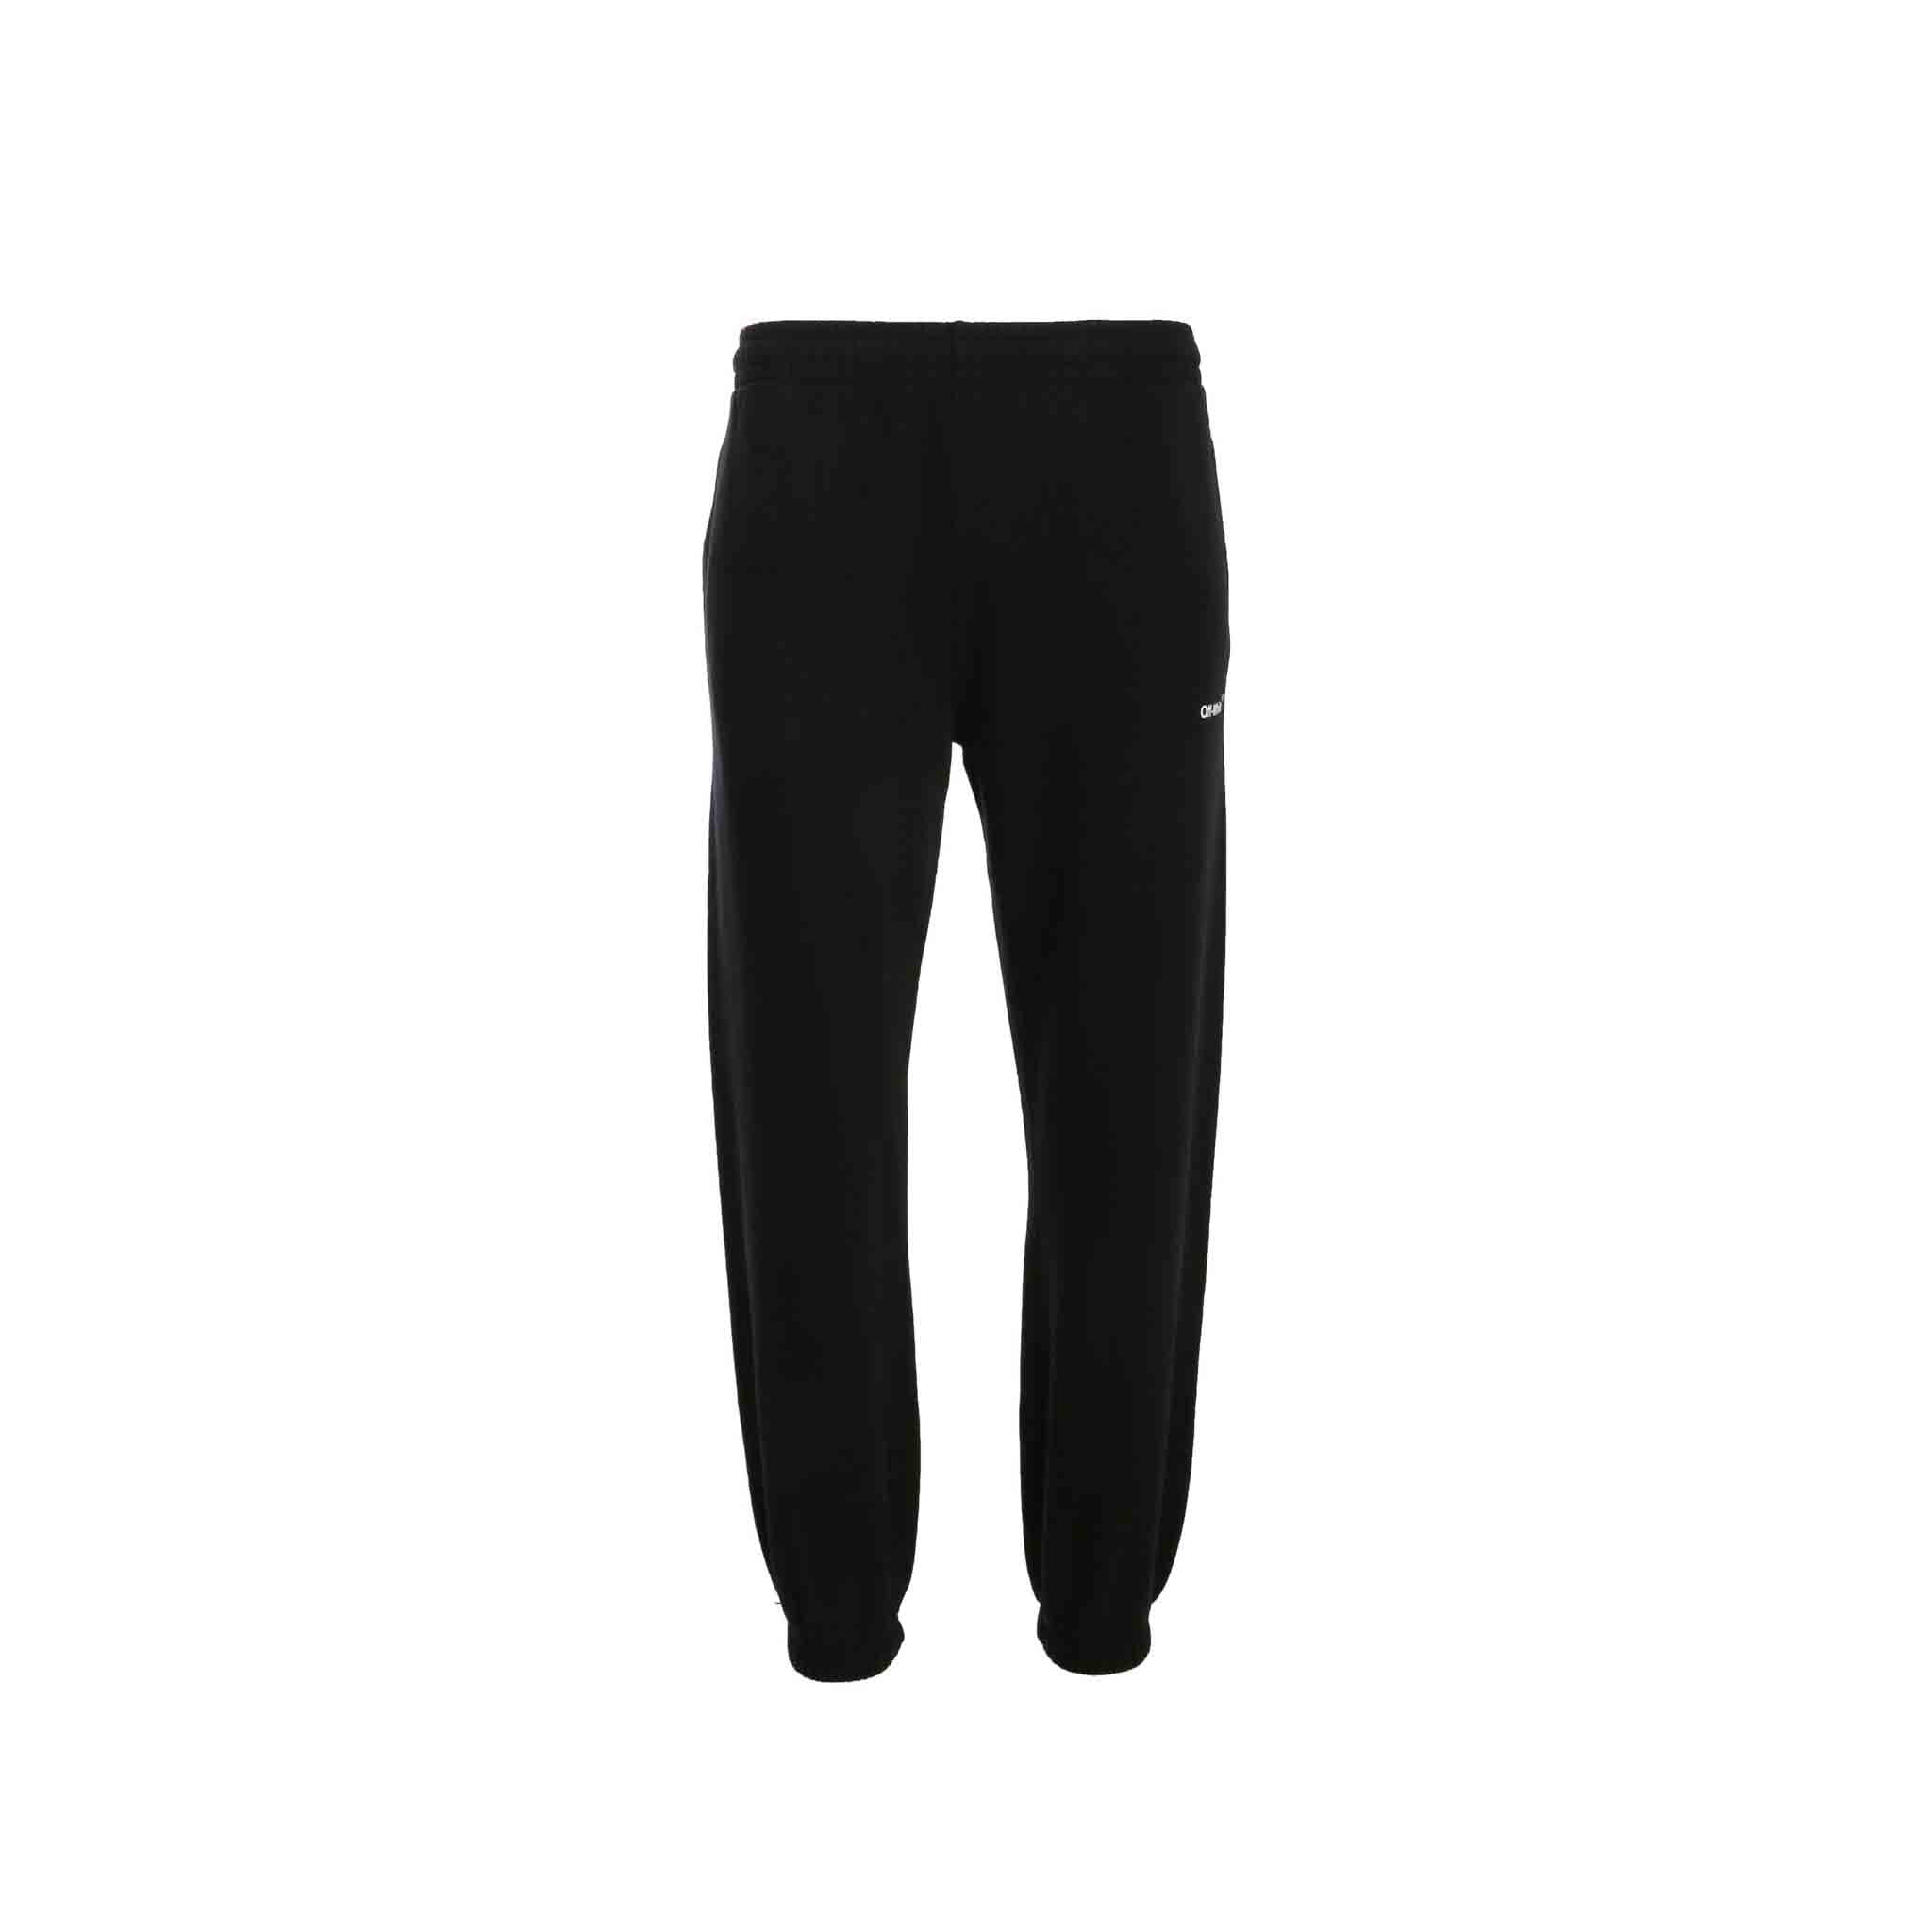 The Off-White sweatpants are a classic and comfortable addition to any casual wardrobe. Made of soft, high-quality cotton, these sweatpants feature a bold Off-White logo on the front and white diagonals on the back. The elasticated waistband and drawstring ensure a perfect fit, while side pockets and a velcro back pocket provide convenient storage.